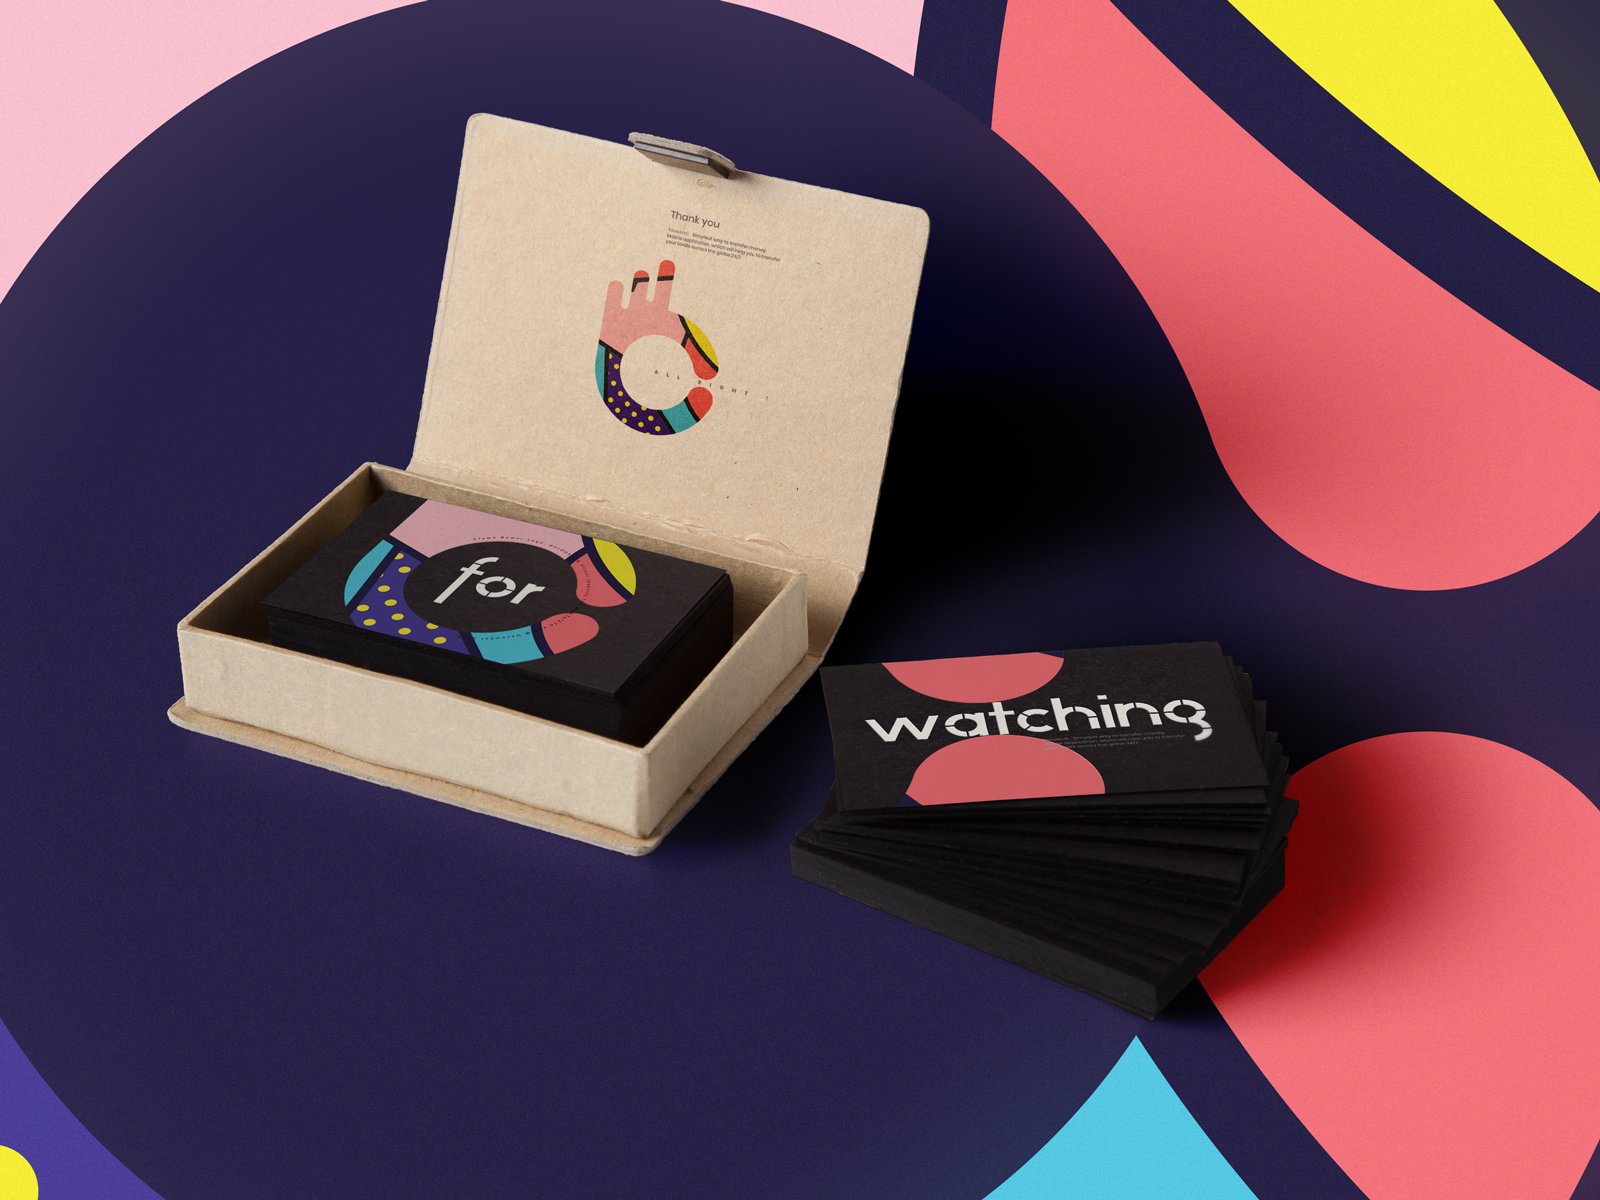 Thank You For Watching By Maxim Aginsky On Dribbble